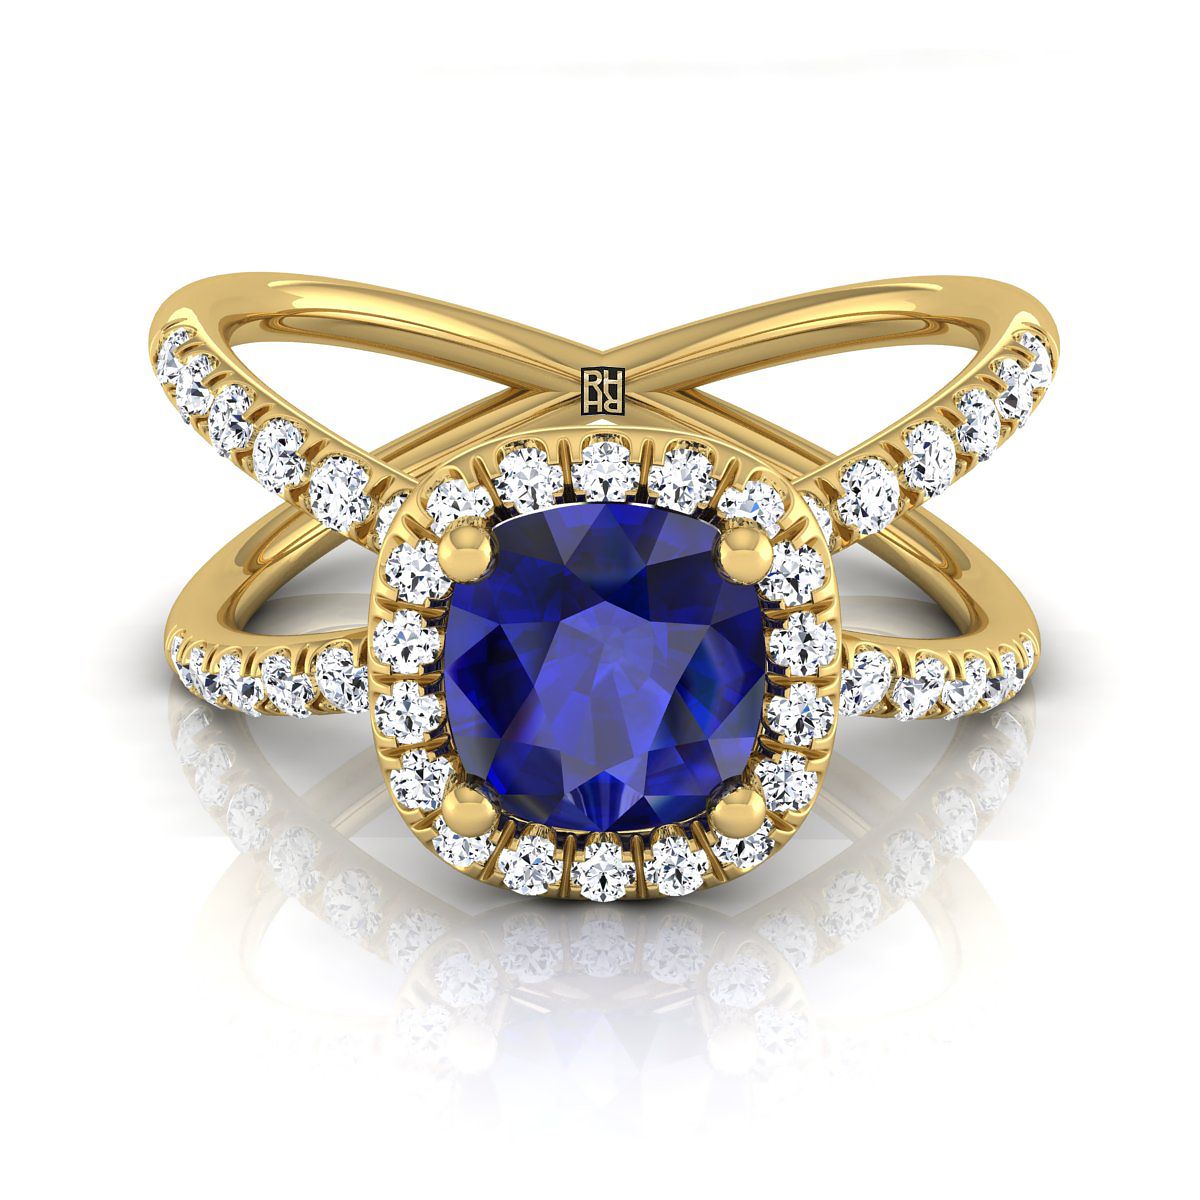 18K Yellow Gold Cushion Sapphire Open Criss Cross French Pave Diamond Engagement Ring -1/2ctw